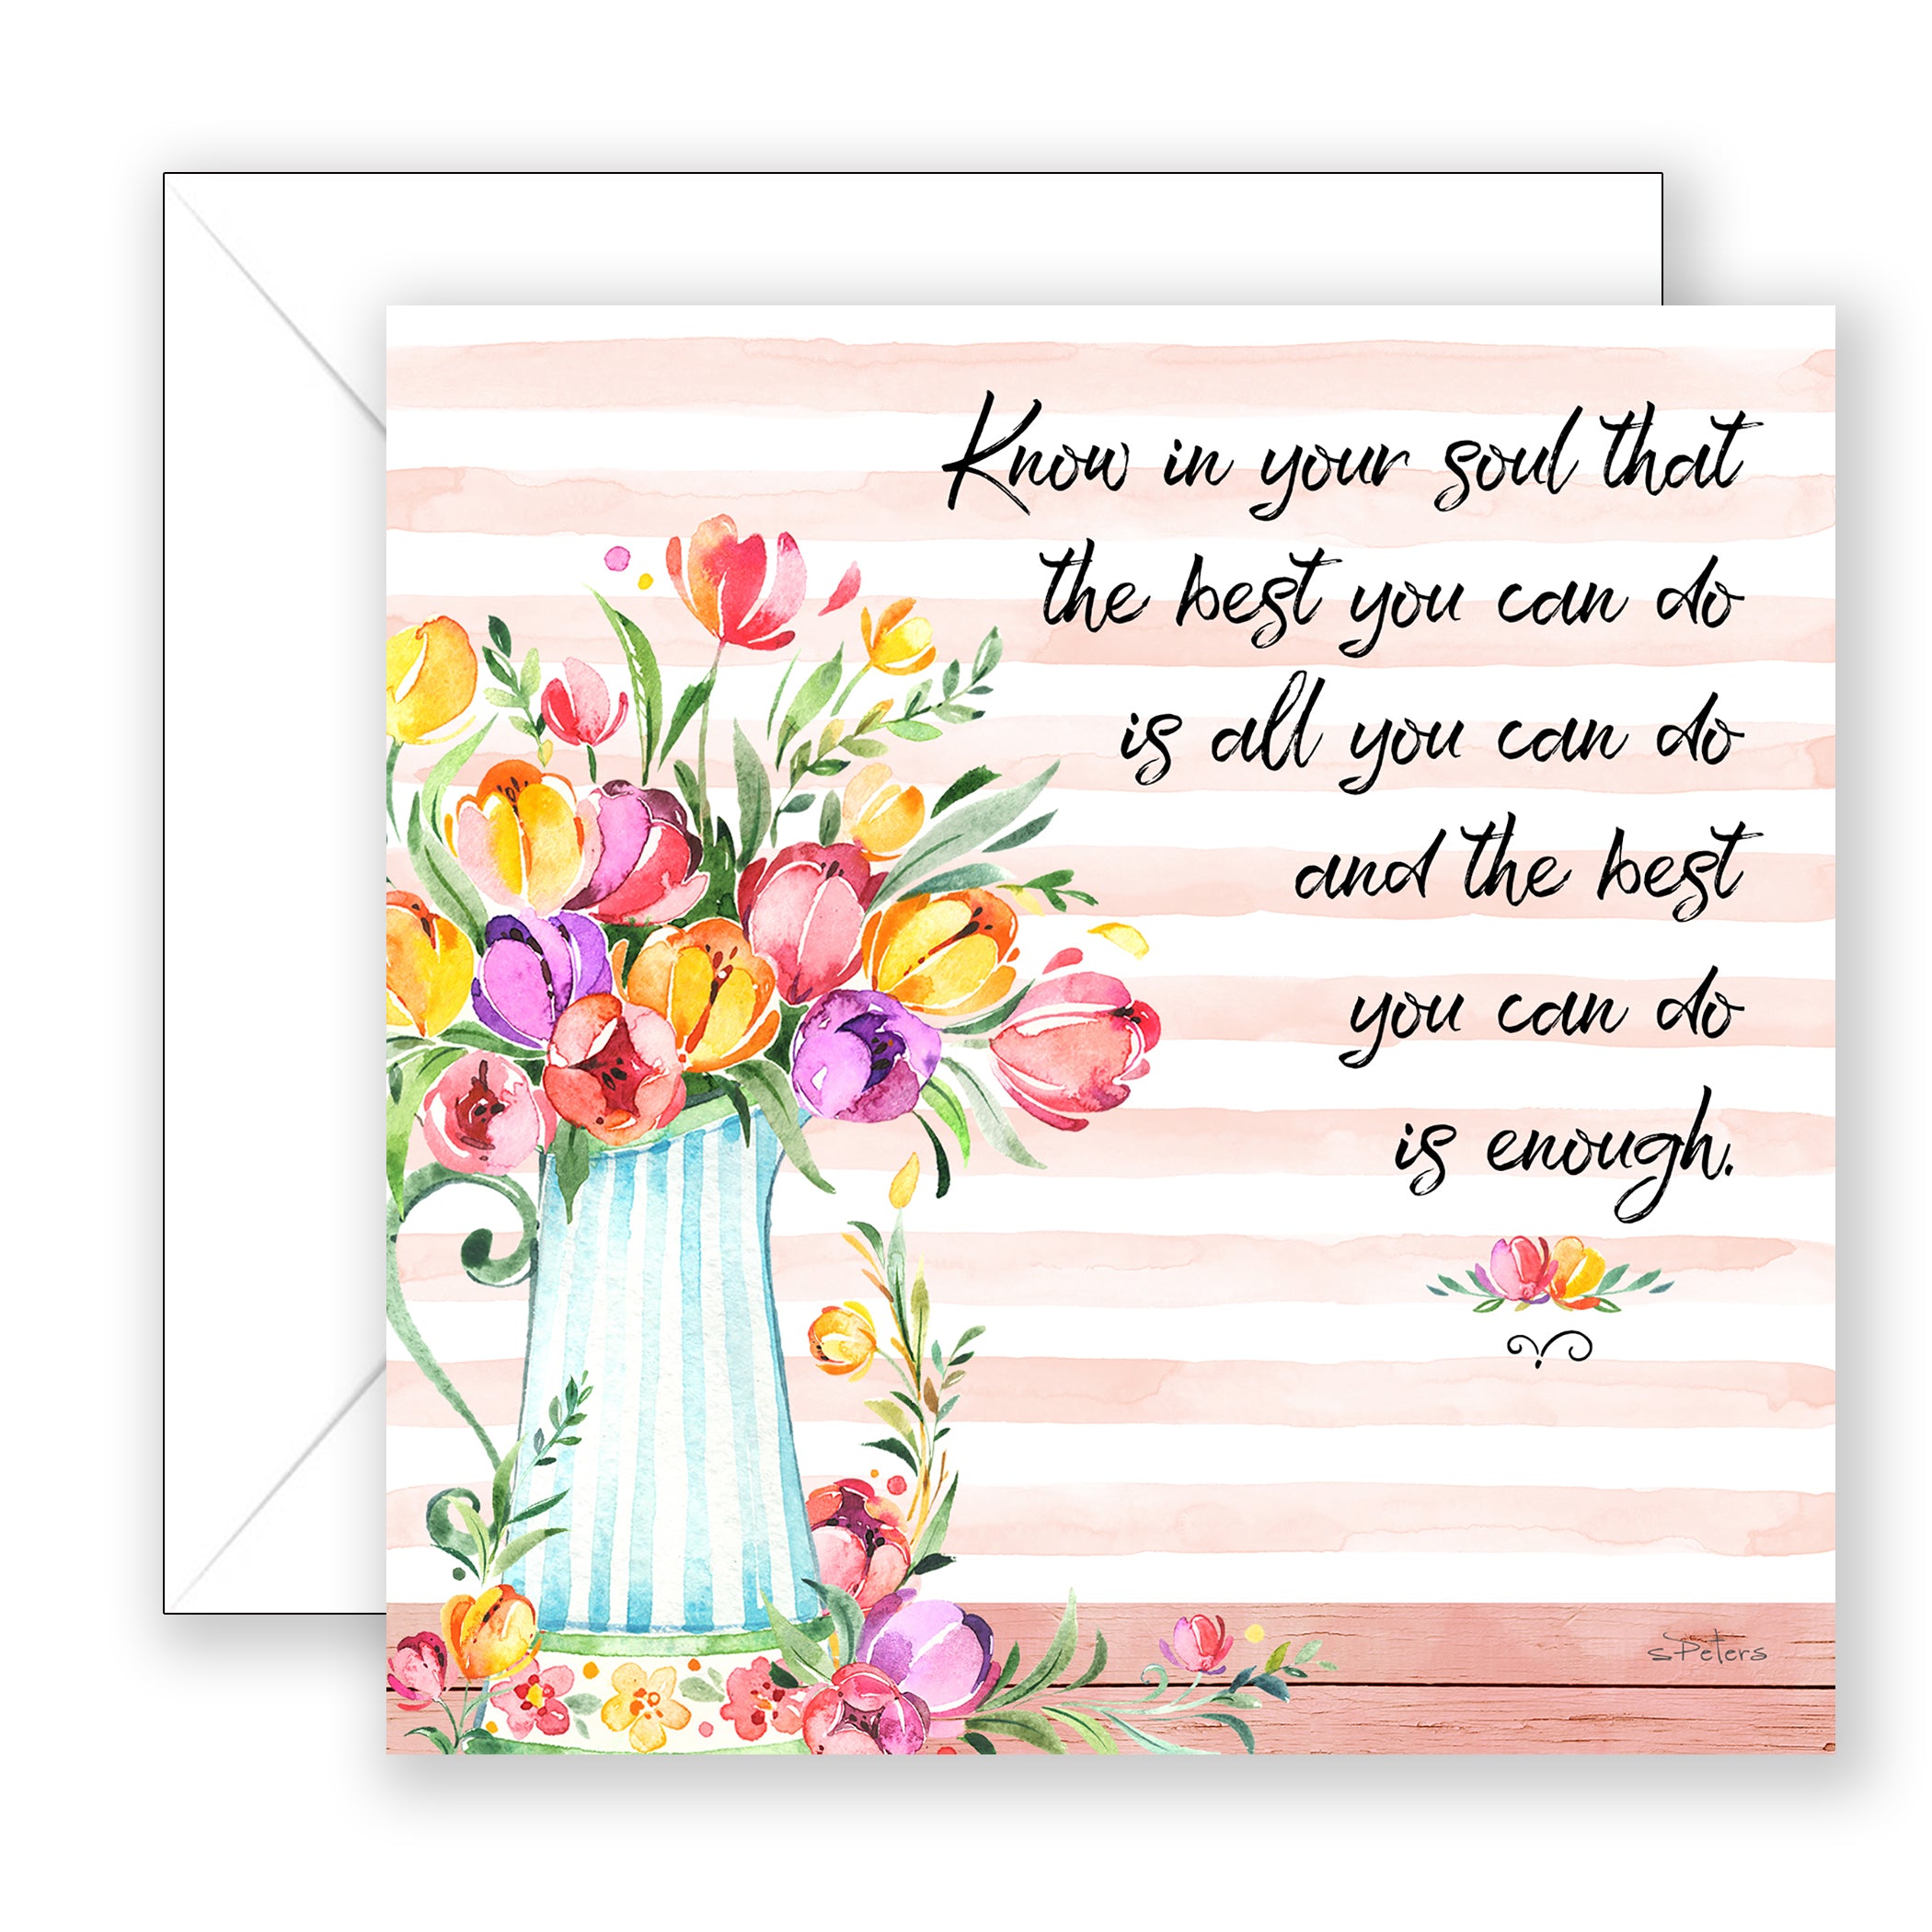 Know In Your Soul - Encouragement Card